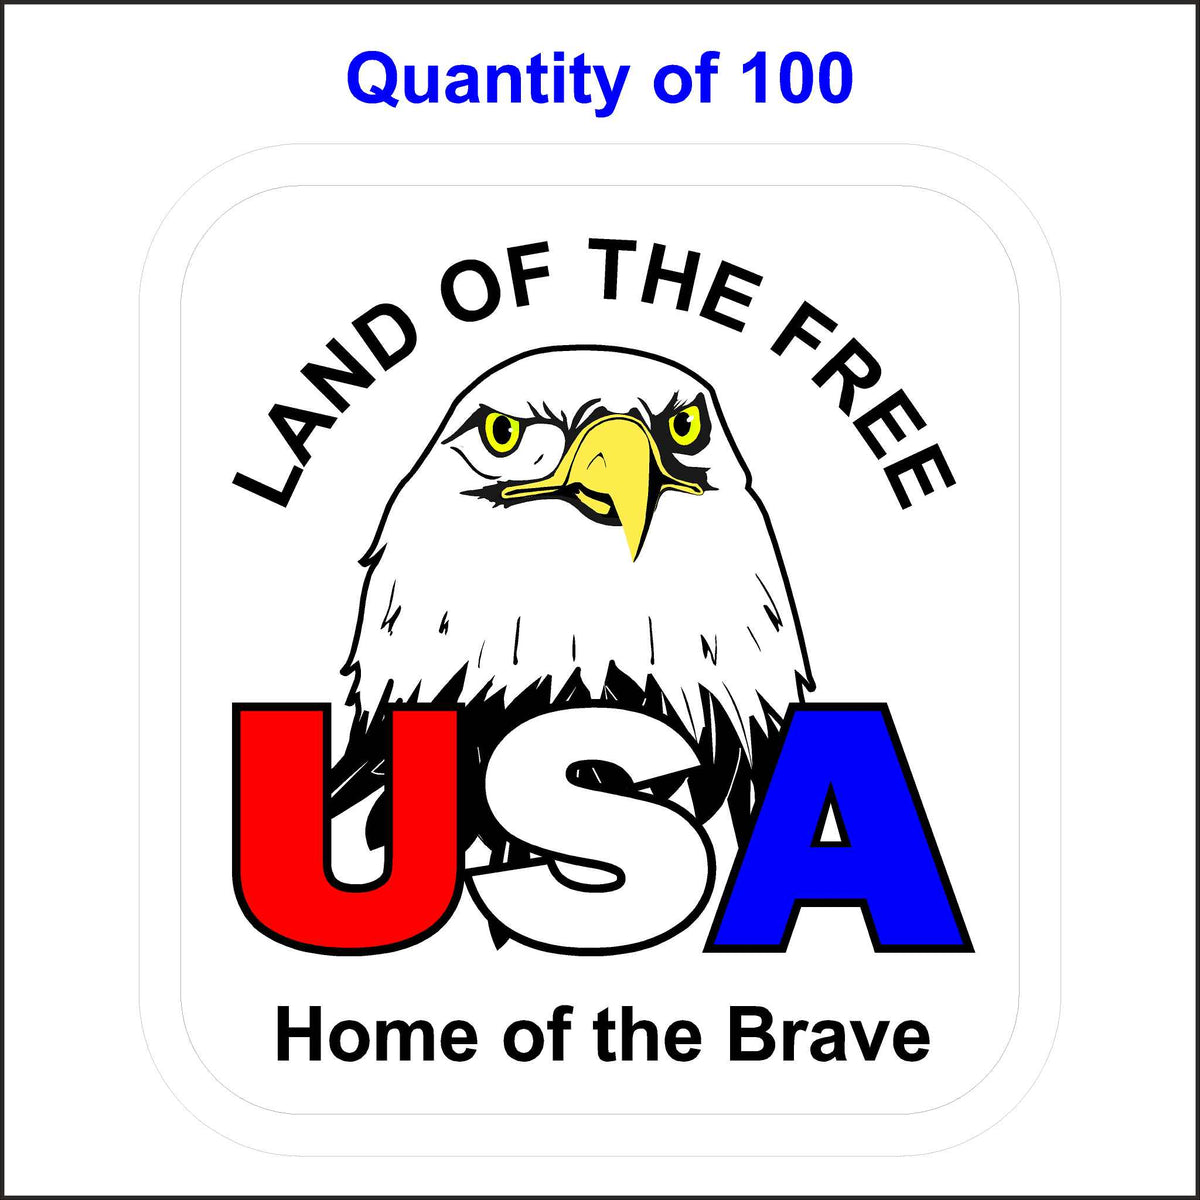 USA Land of the Free Home of the Brave Patriotic Sticker. This Sticker Has and Eagle and in Printed in Red, White, and Blue. 100 Quantity.